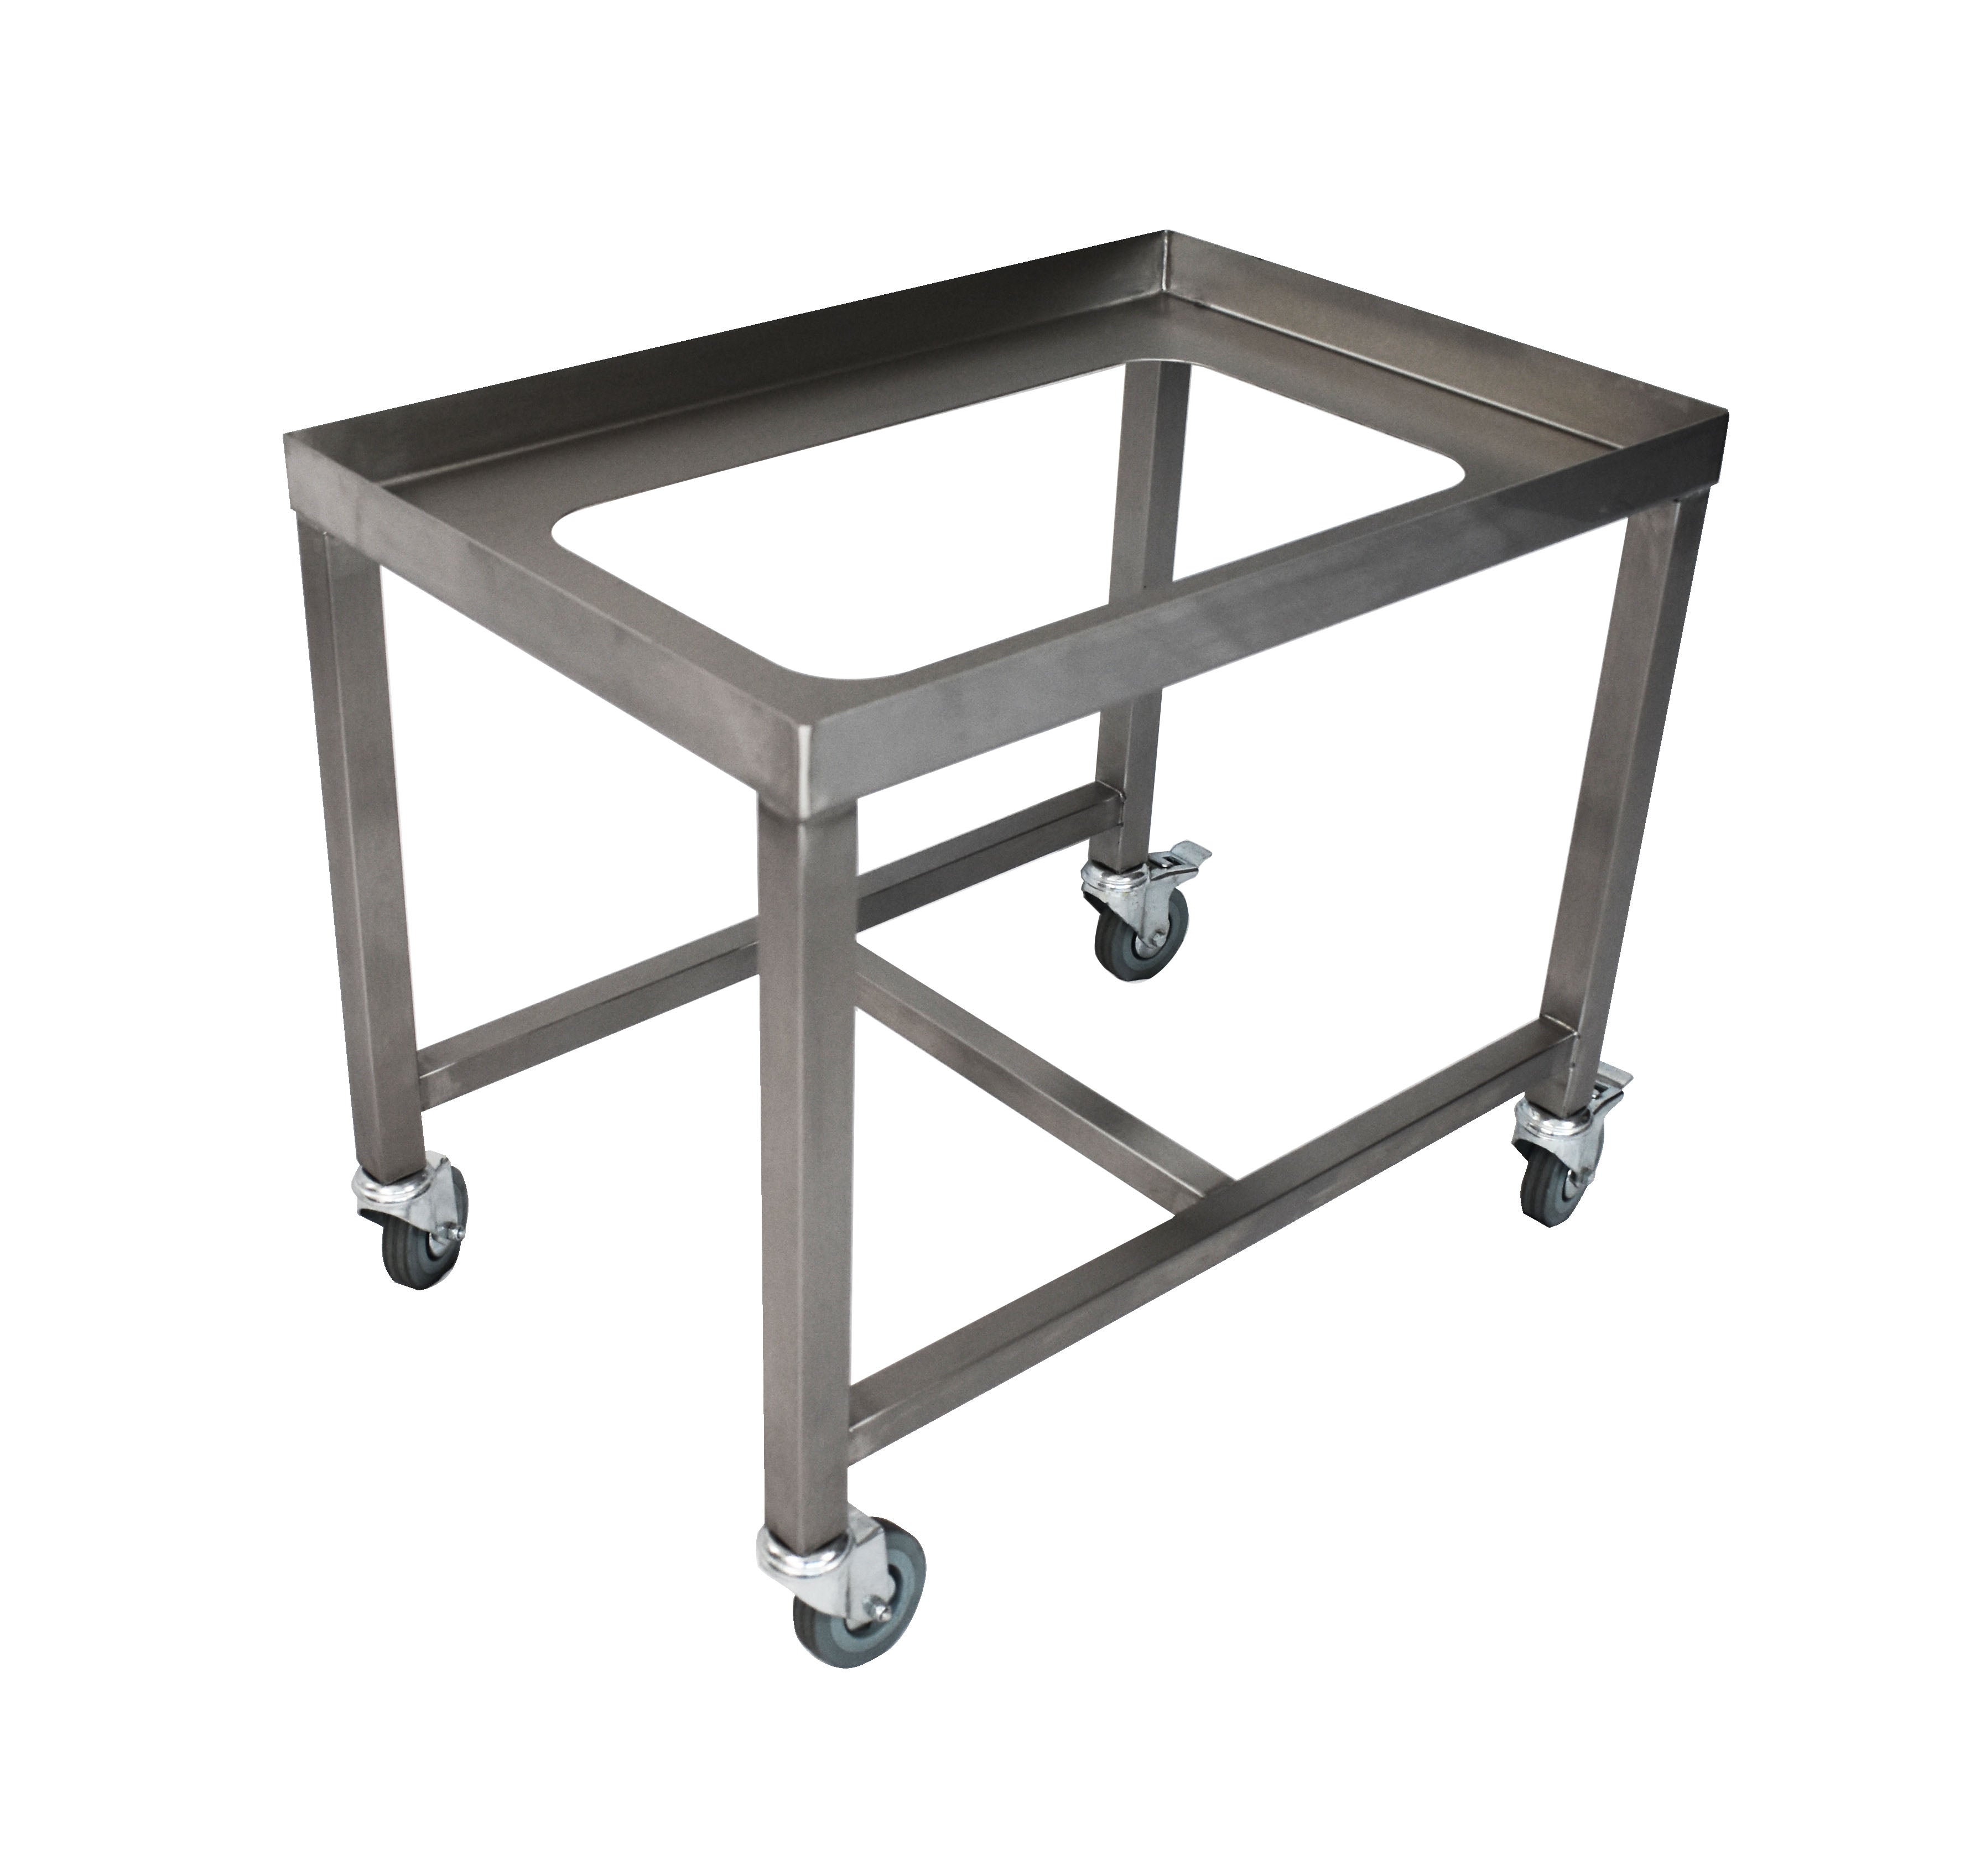 Stainless steel tray stands